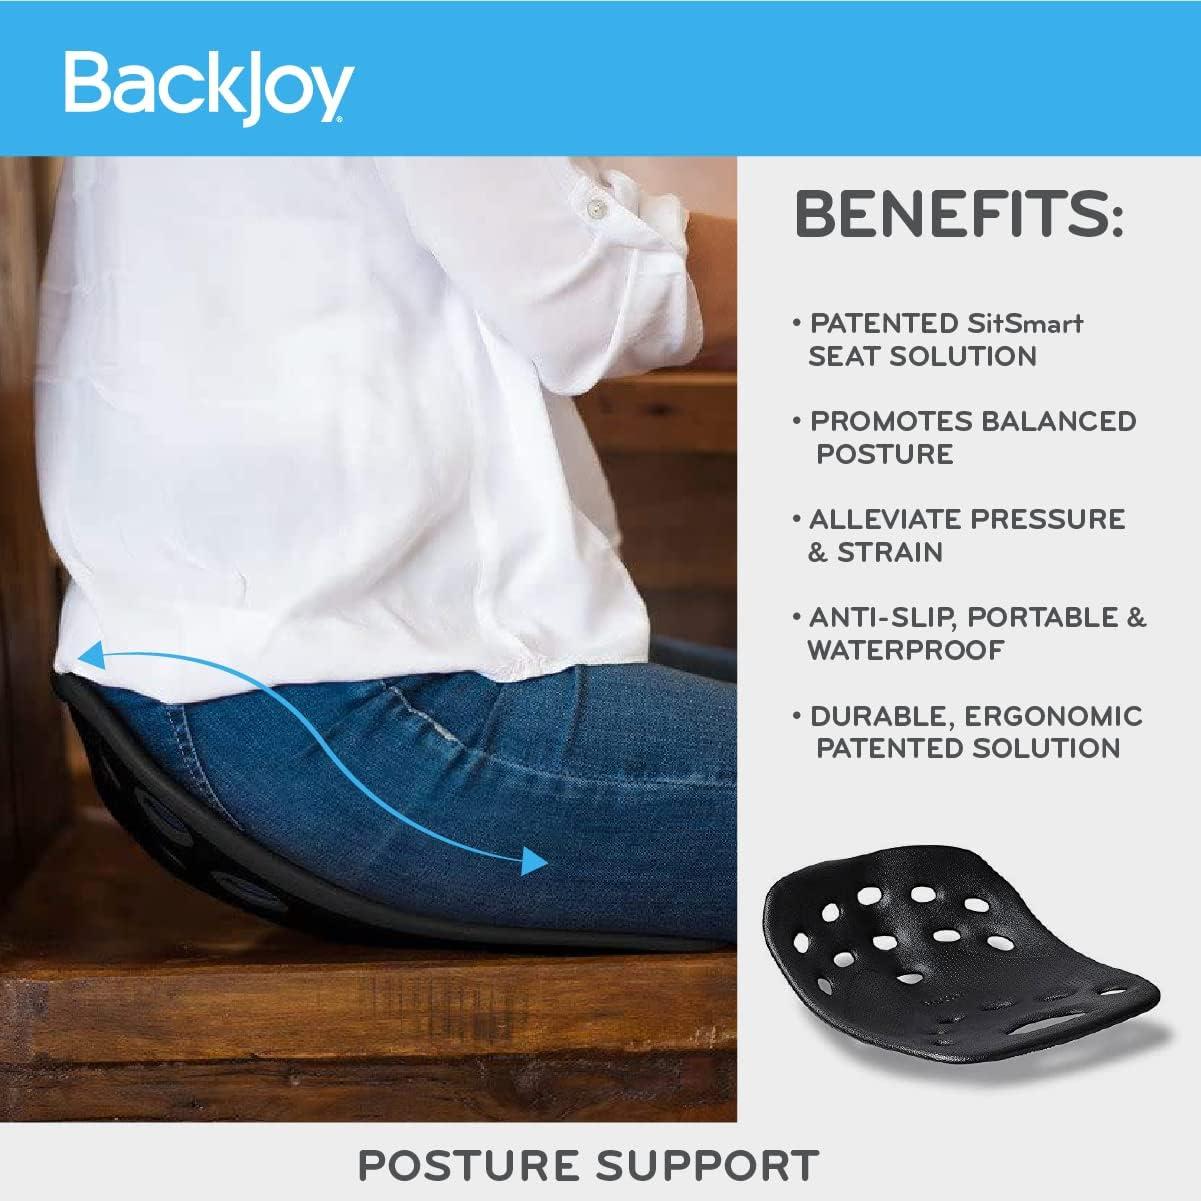  Backjoy Posture Seat Pad, Ergonomic Pressure Relief, Hip &  Pelvic Support to Improve Posture, Home, Office Chair, Car Seat, Core Lux